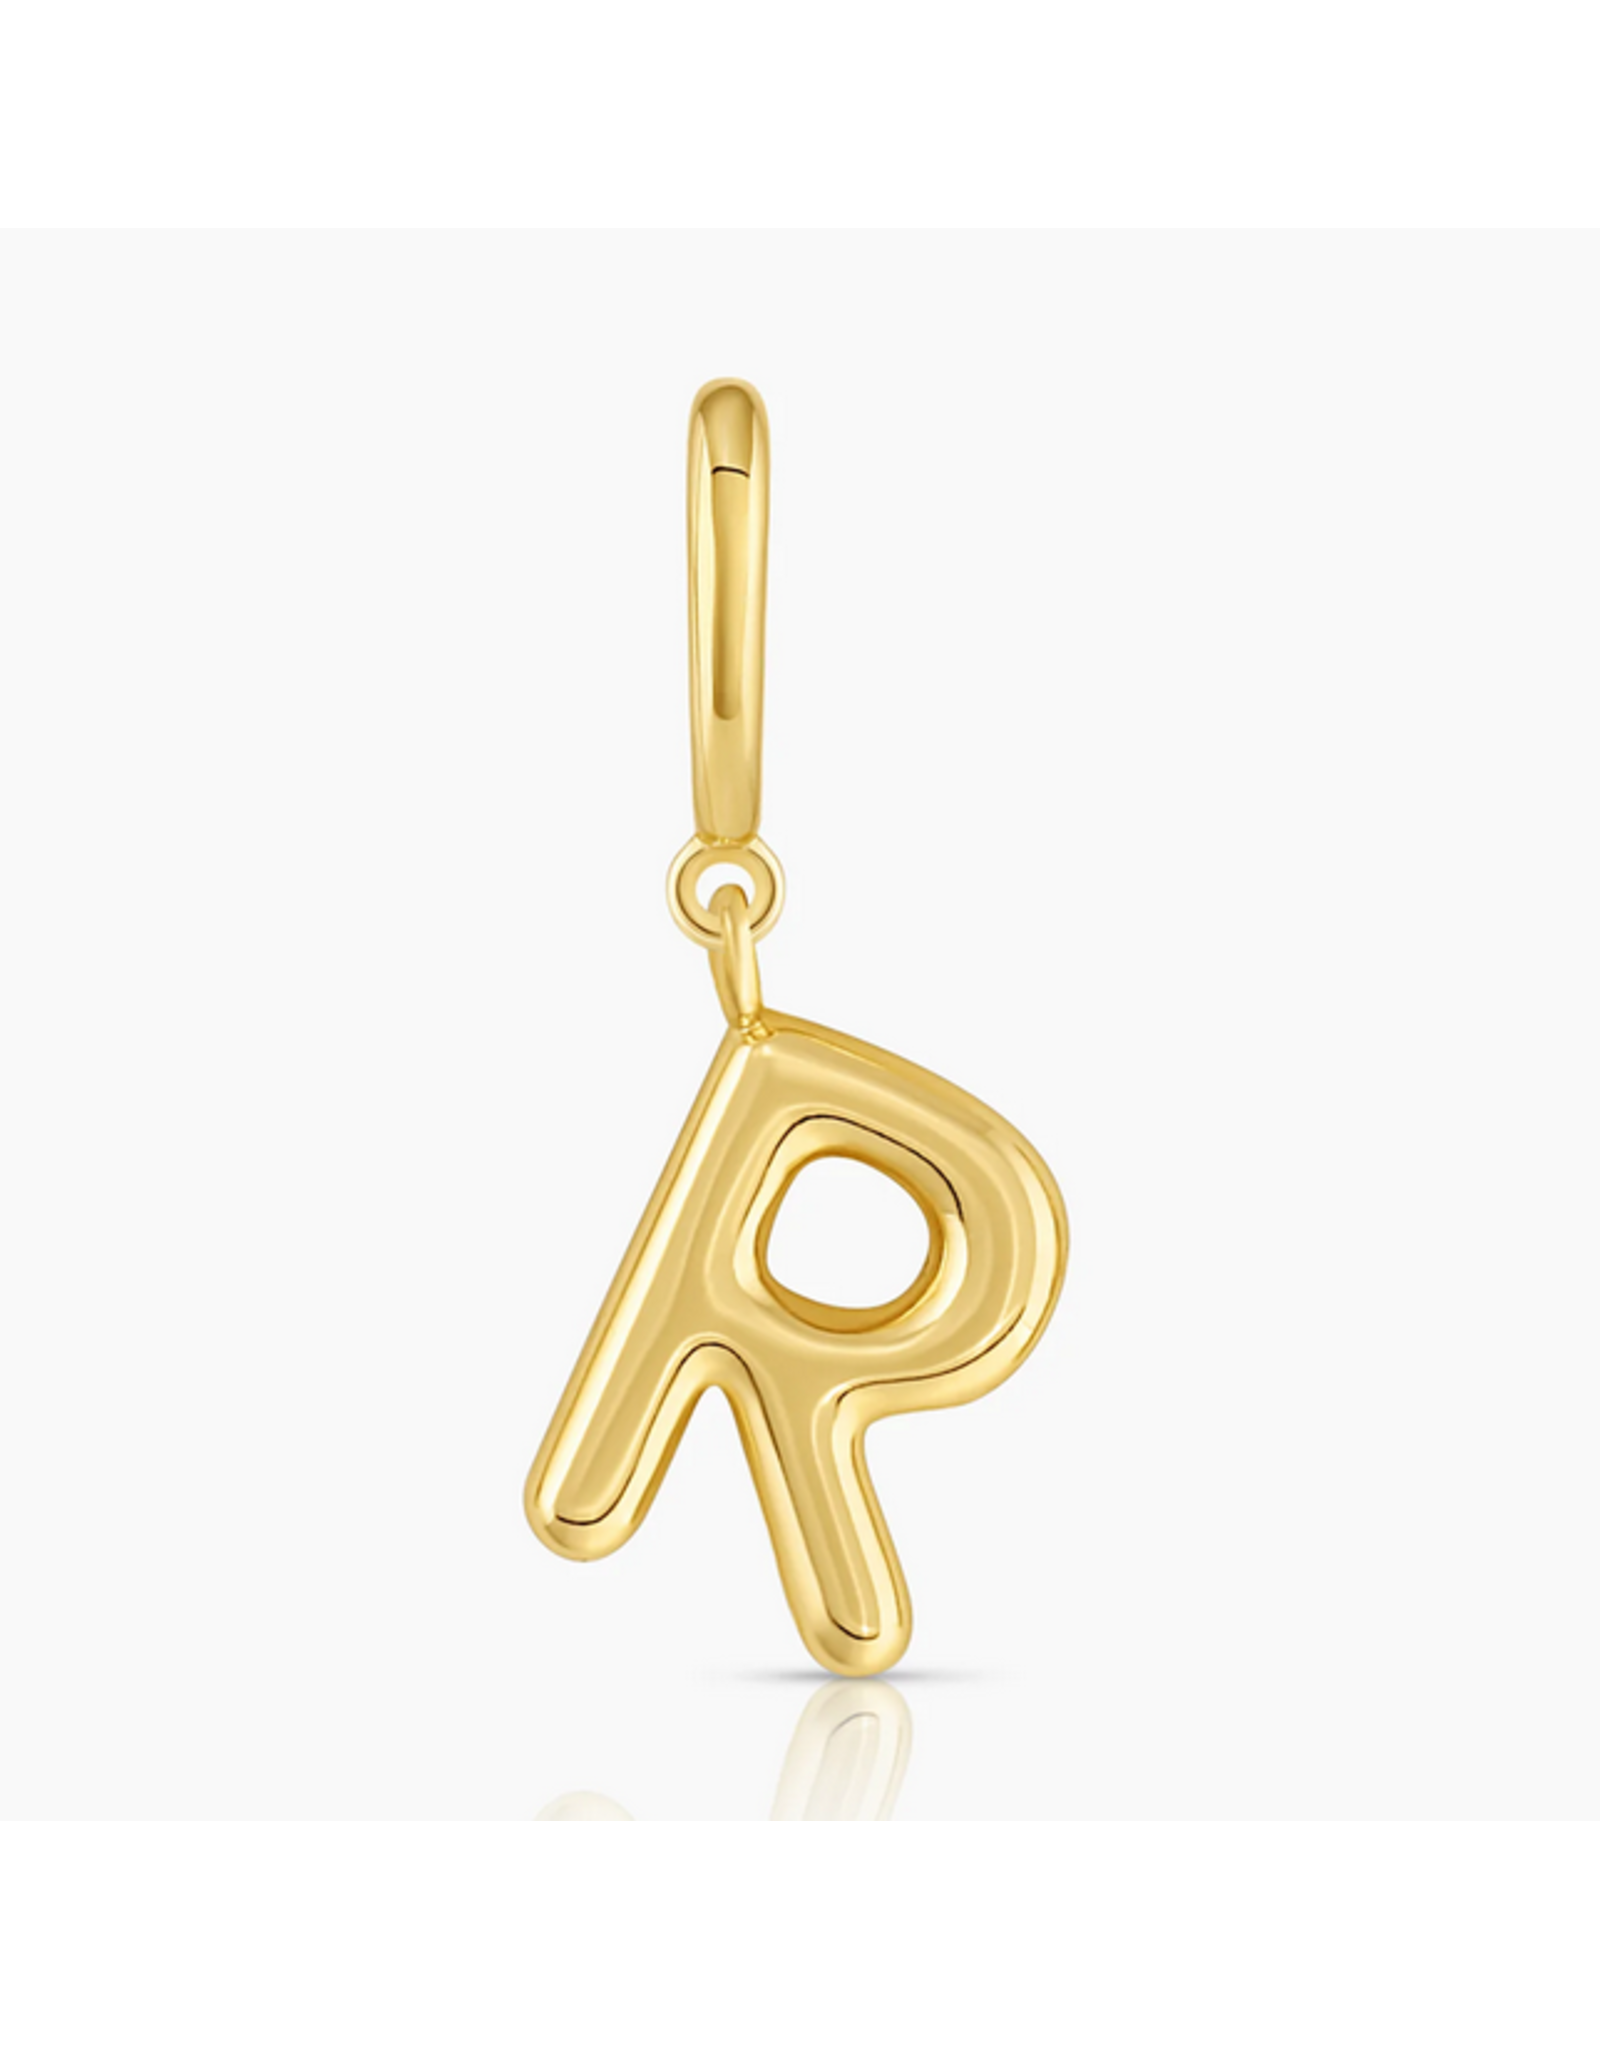 Vintage Alphabet Charm in D/Gold Plated, Women's by Gorjana